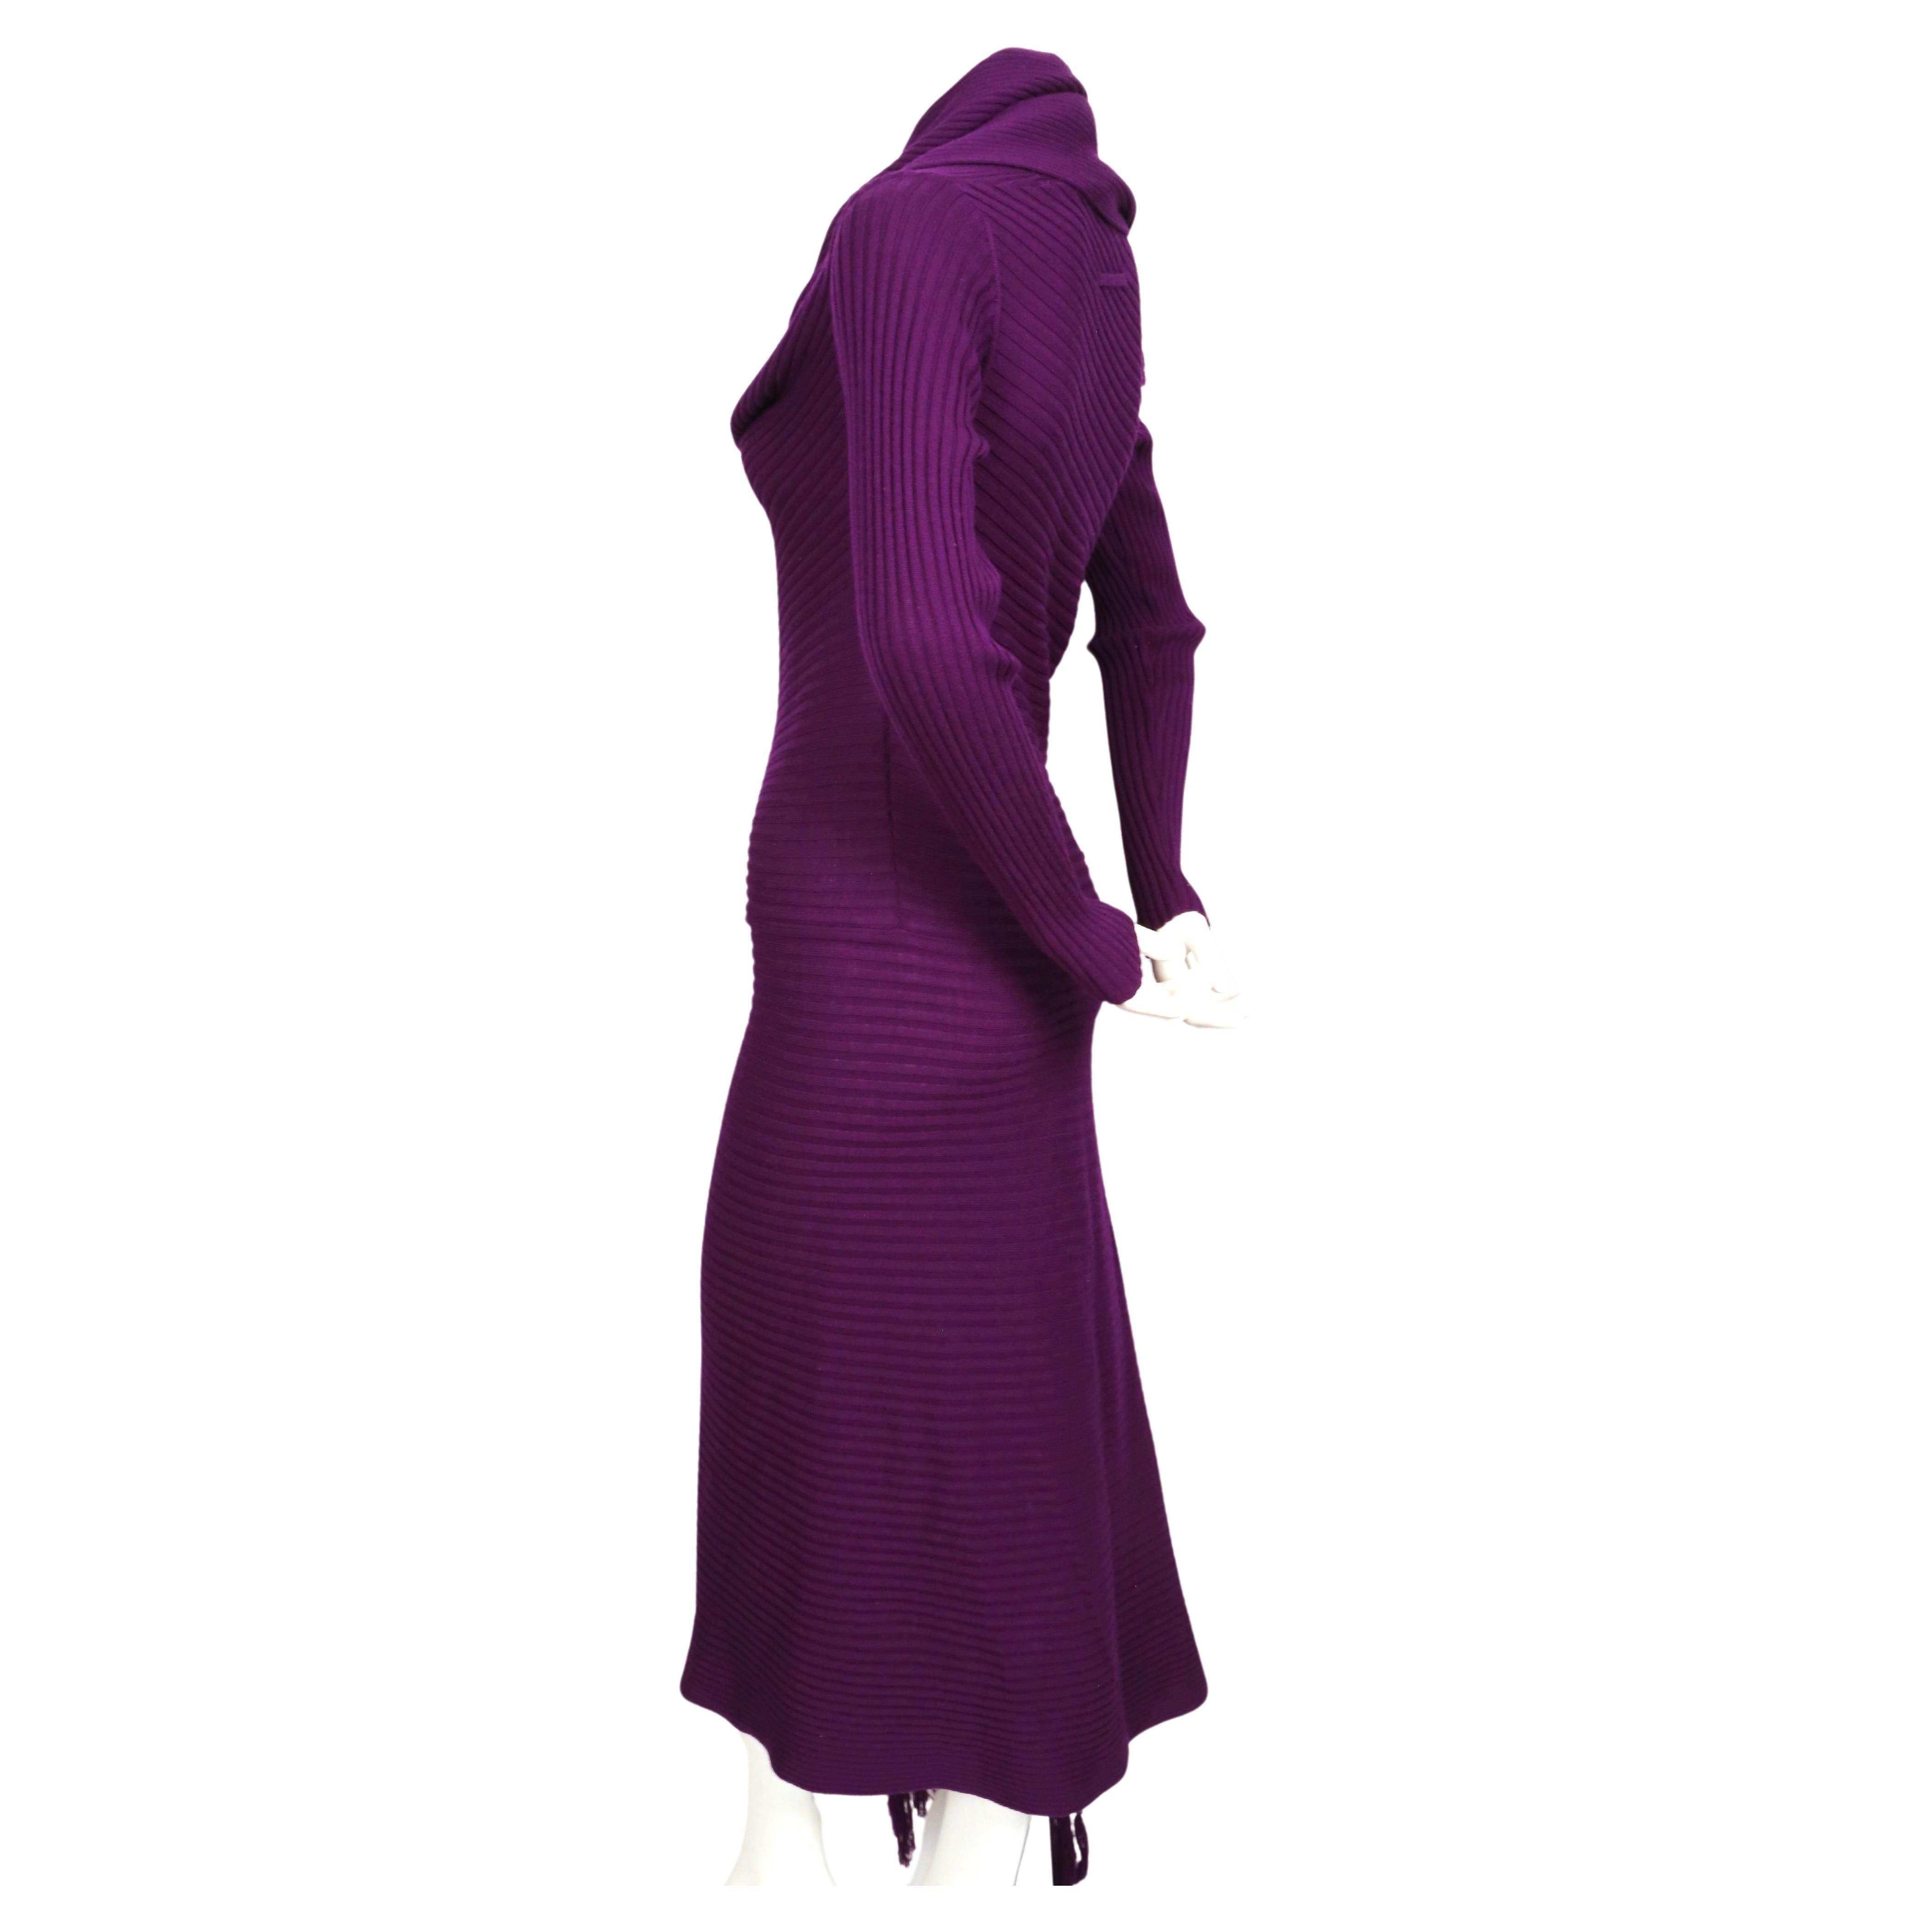  JEAN PAUL GAULTIER purple ribbed knit dress with scarf For Sale 1